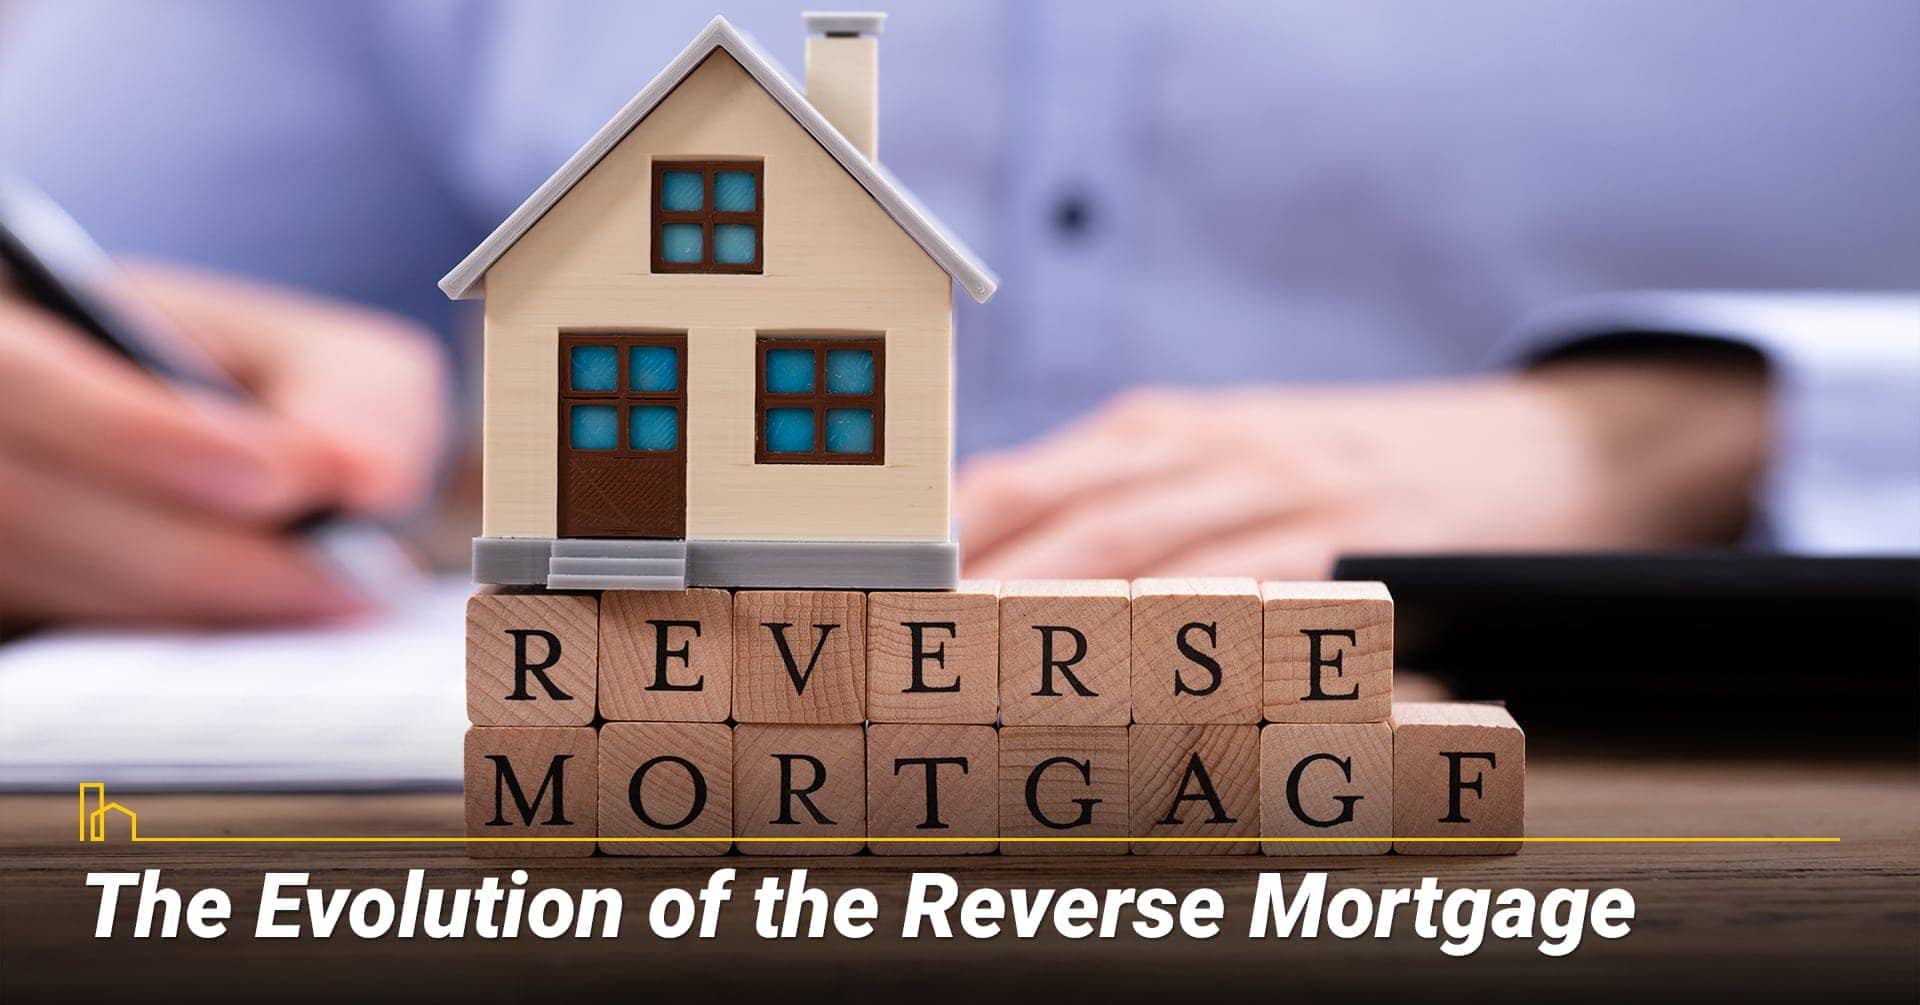 How Long Have Reverse Mortgages Been Around? The evolution of the reverse mortgage